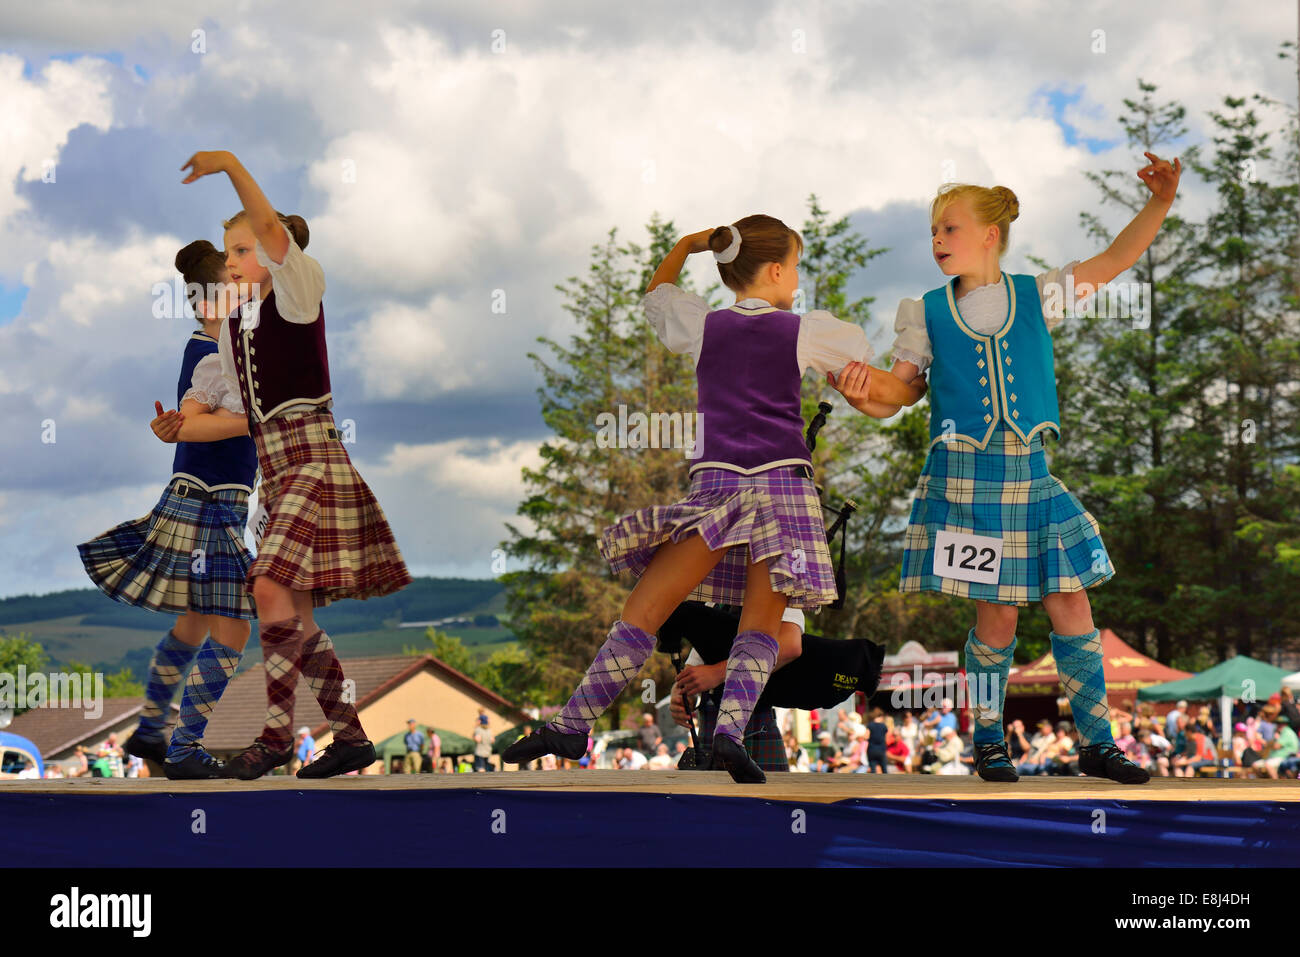 Girls in a Highland Dancing competition at the Highland Games, Dufftown, Moray, Highlands, Scotland, United Kingdom Stock Photo